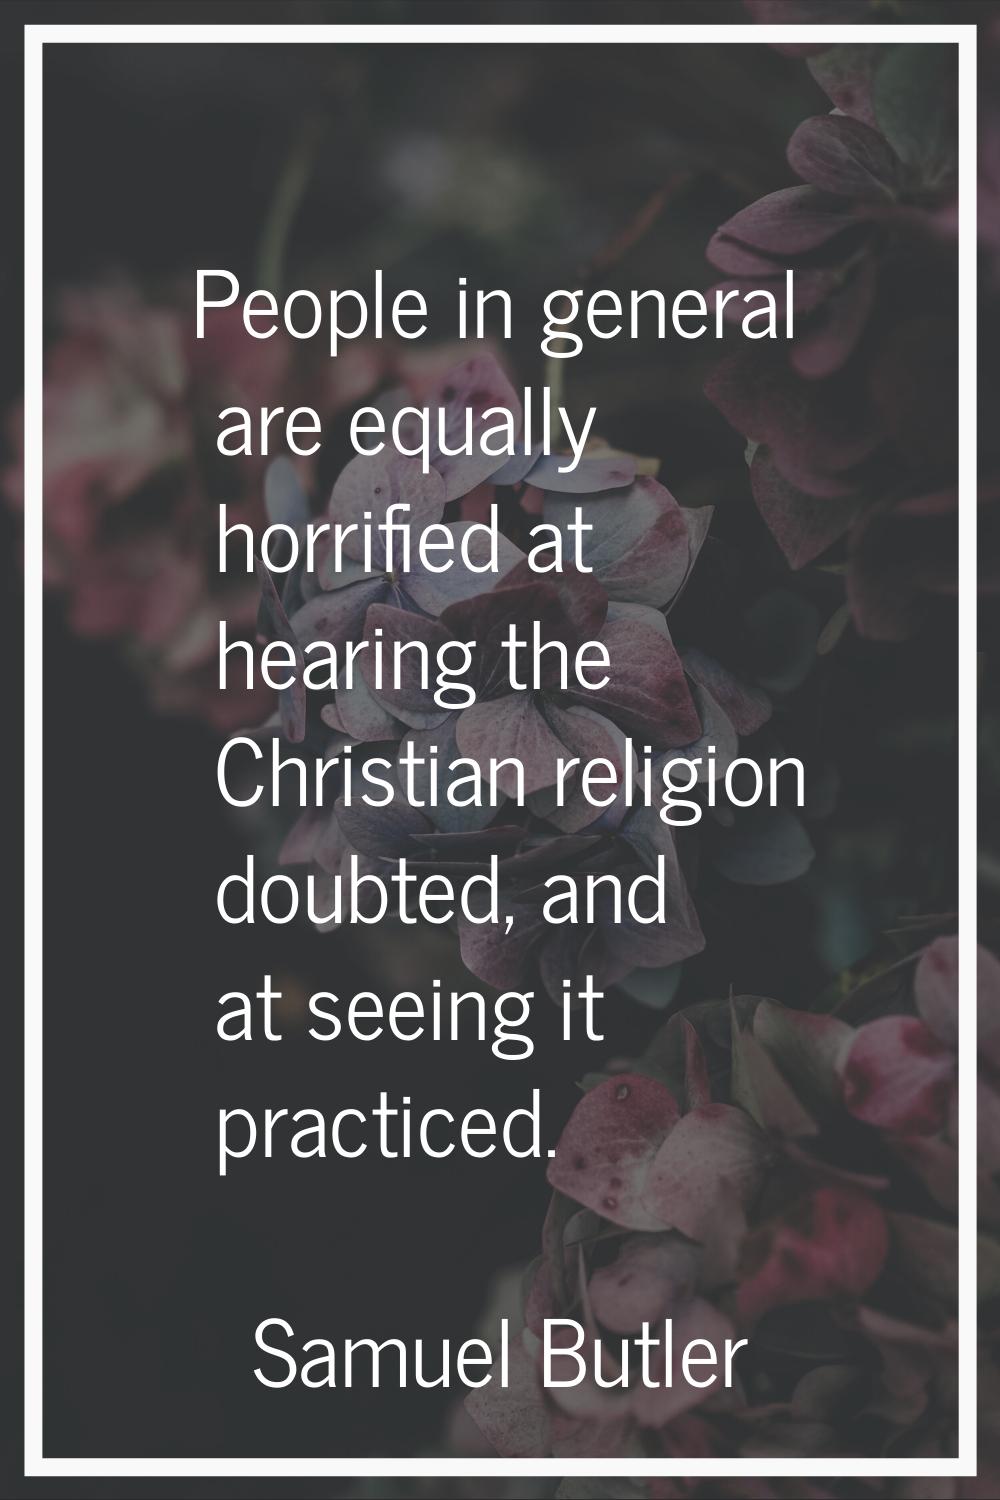 People in general are equally horrified at hearing the Christian religion doubted, and at seeing it